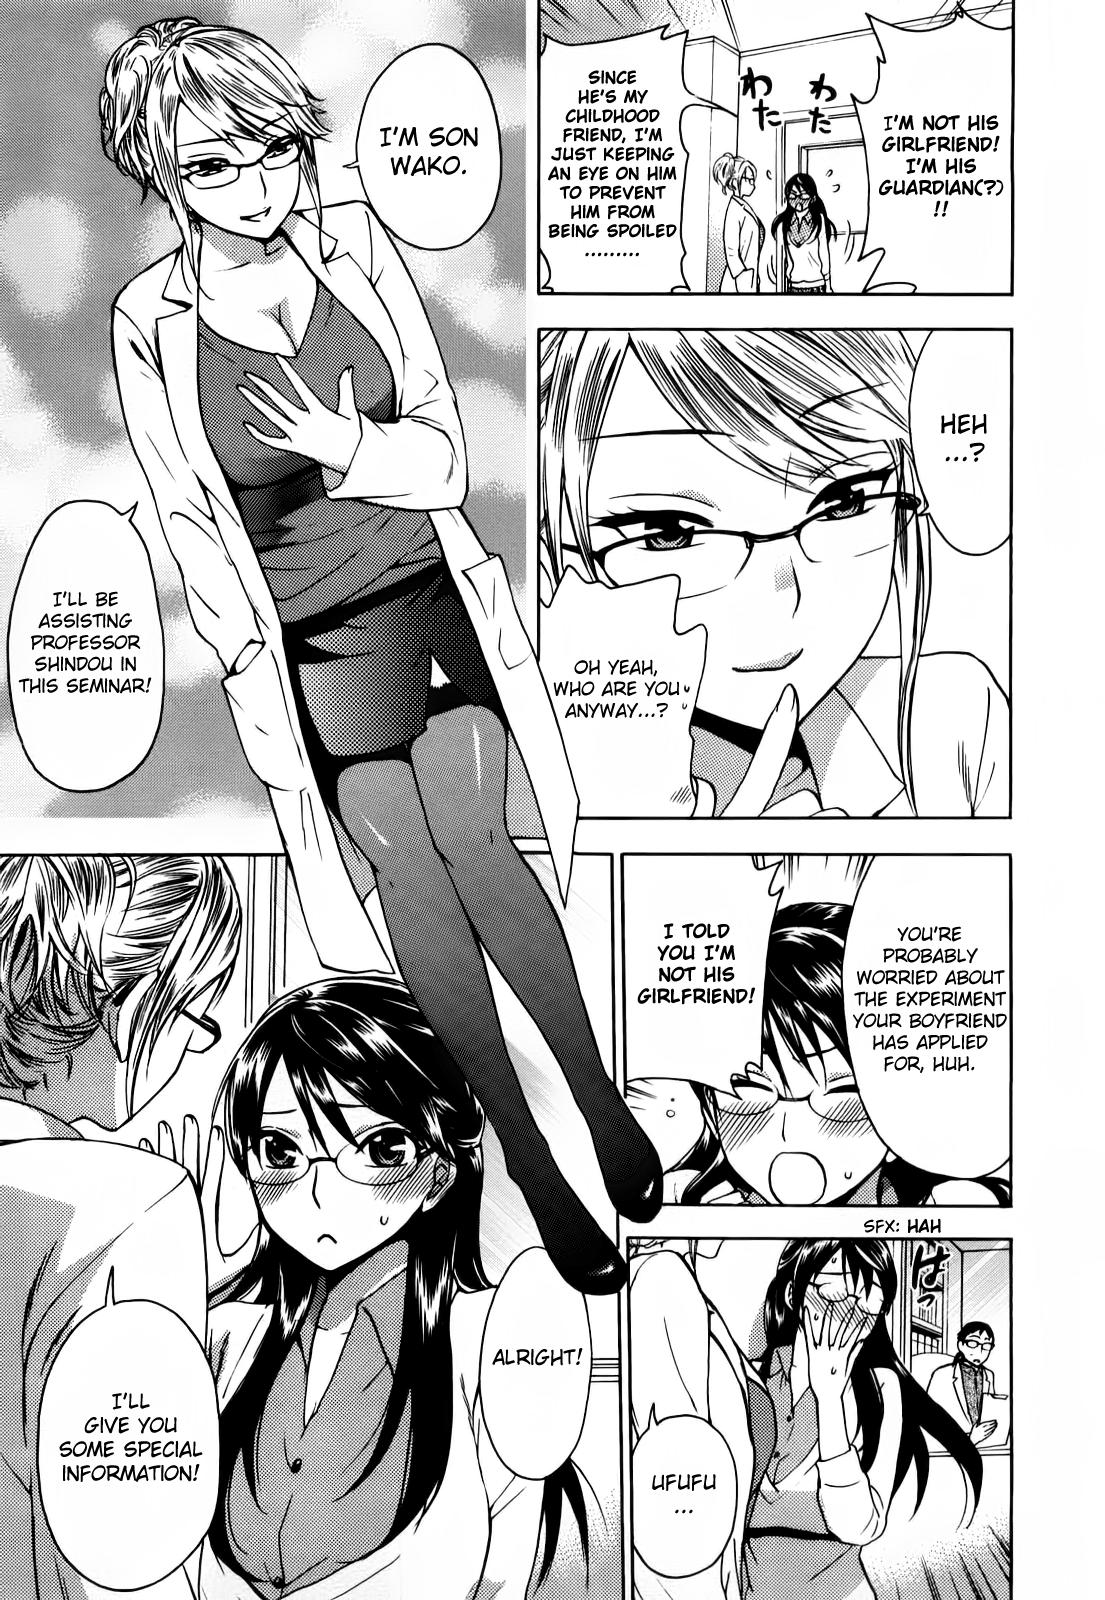 Pussyeating [Kuon Michiyoshi] Zettai Harem Vol. 1 - Ch. 1-2 [English] [Manga is in the Air] Celebrity Porn - Page 11